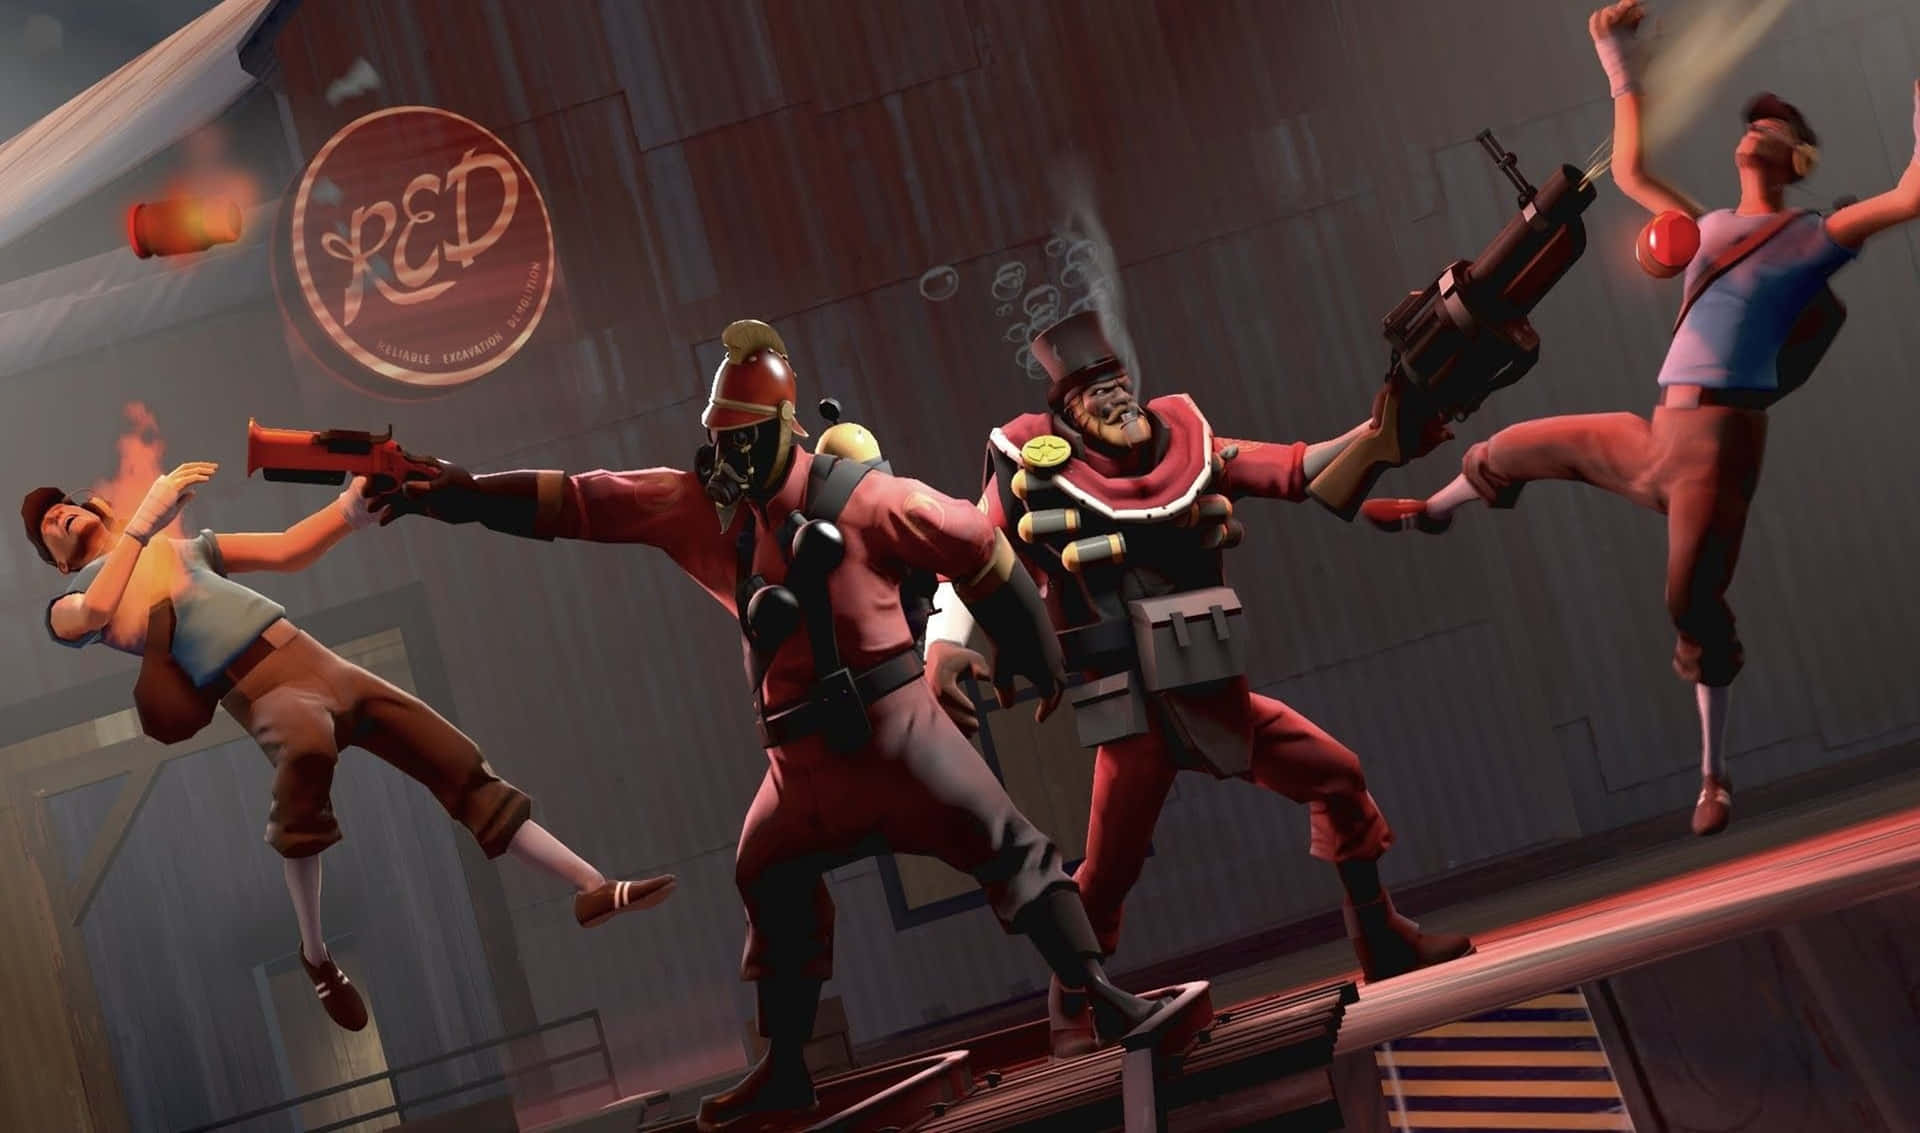 2440x1440 Team Fortress 2 Background Wallpaper